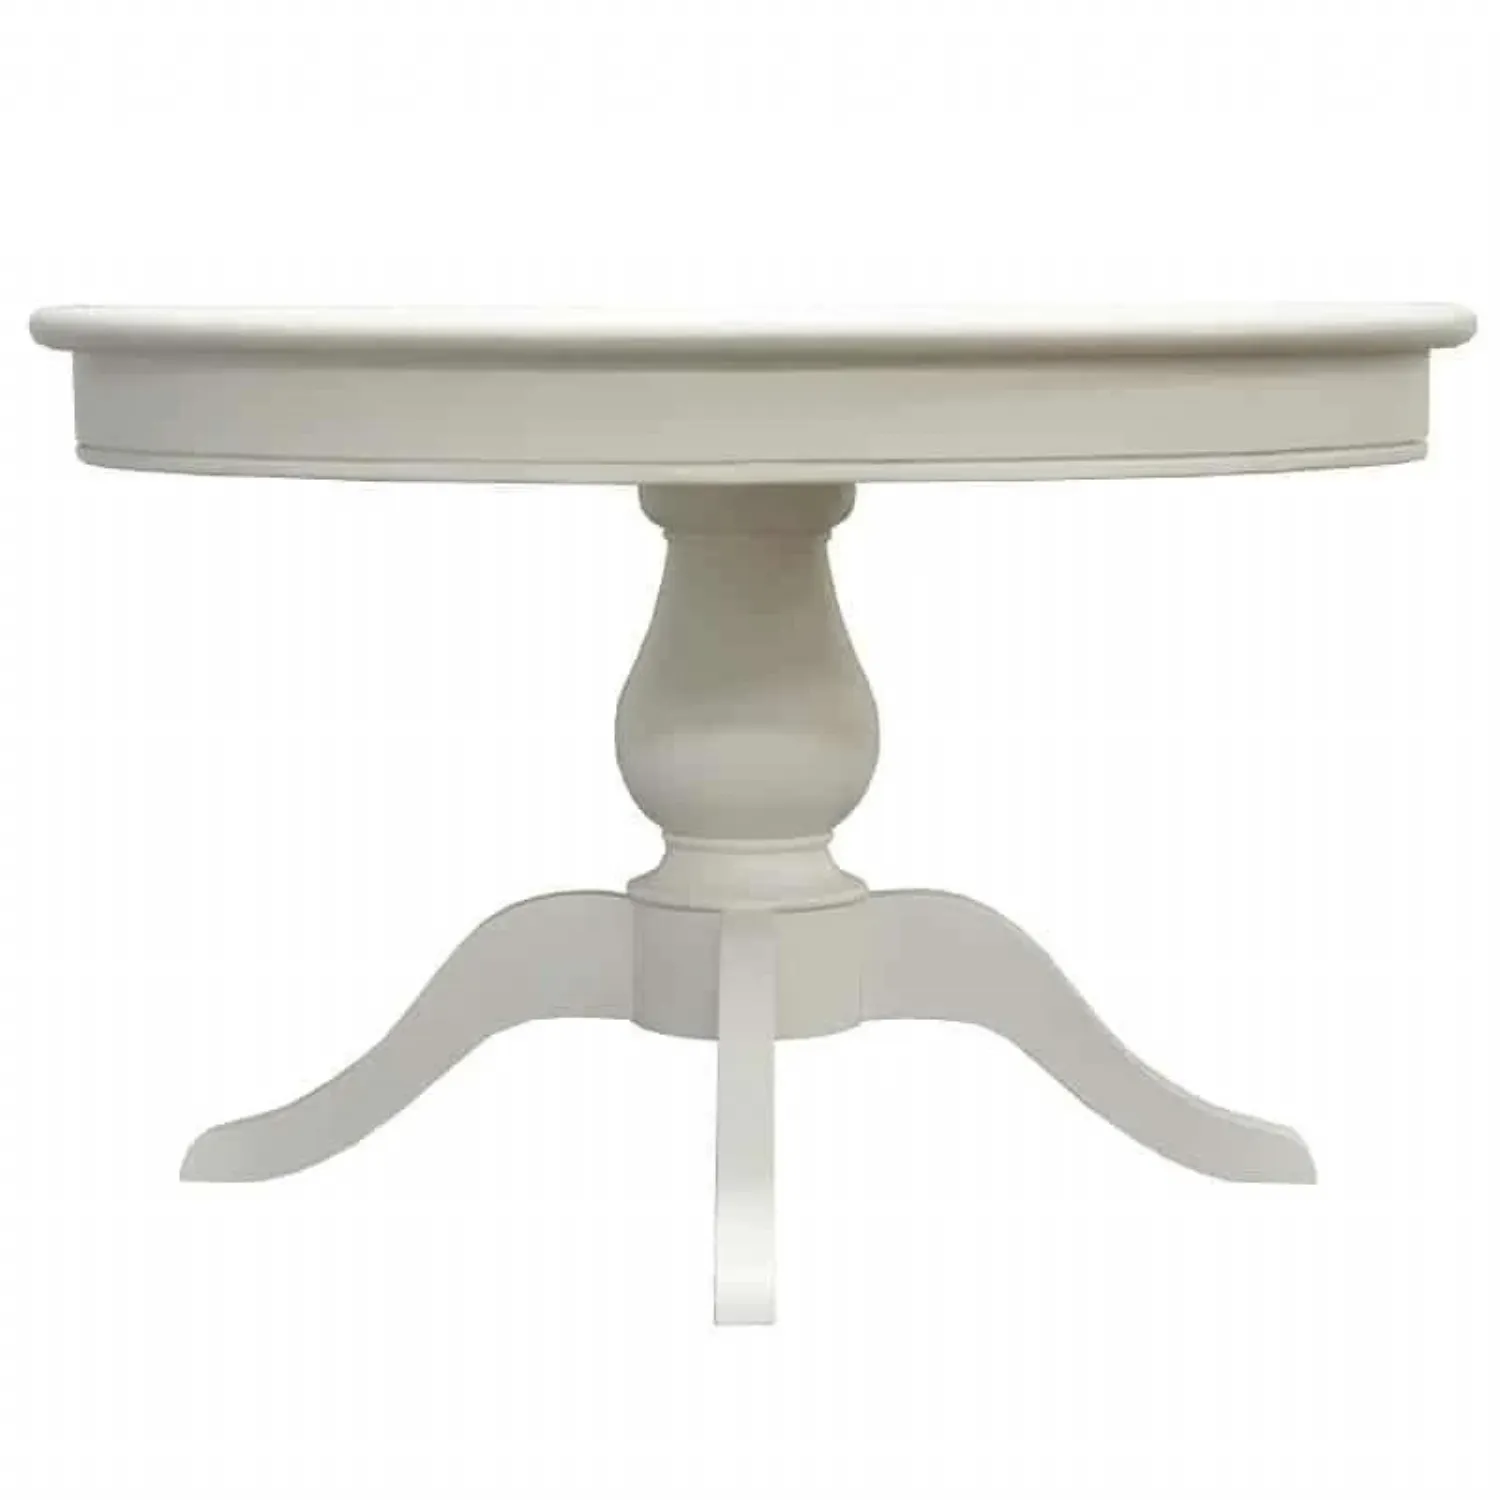 White Painted Round Dining Table 120cm Diameter